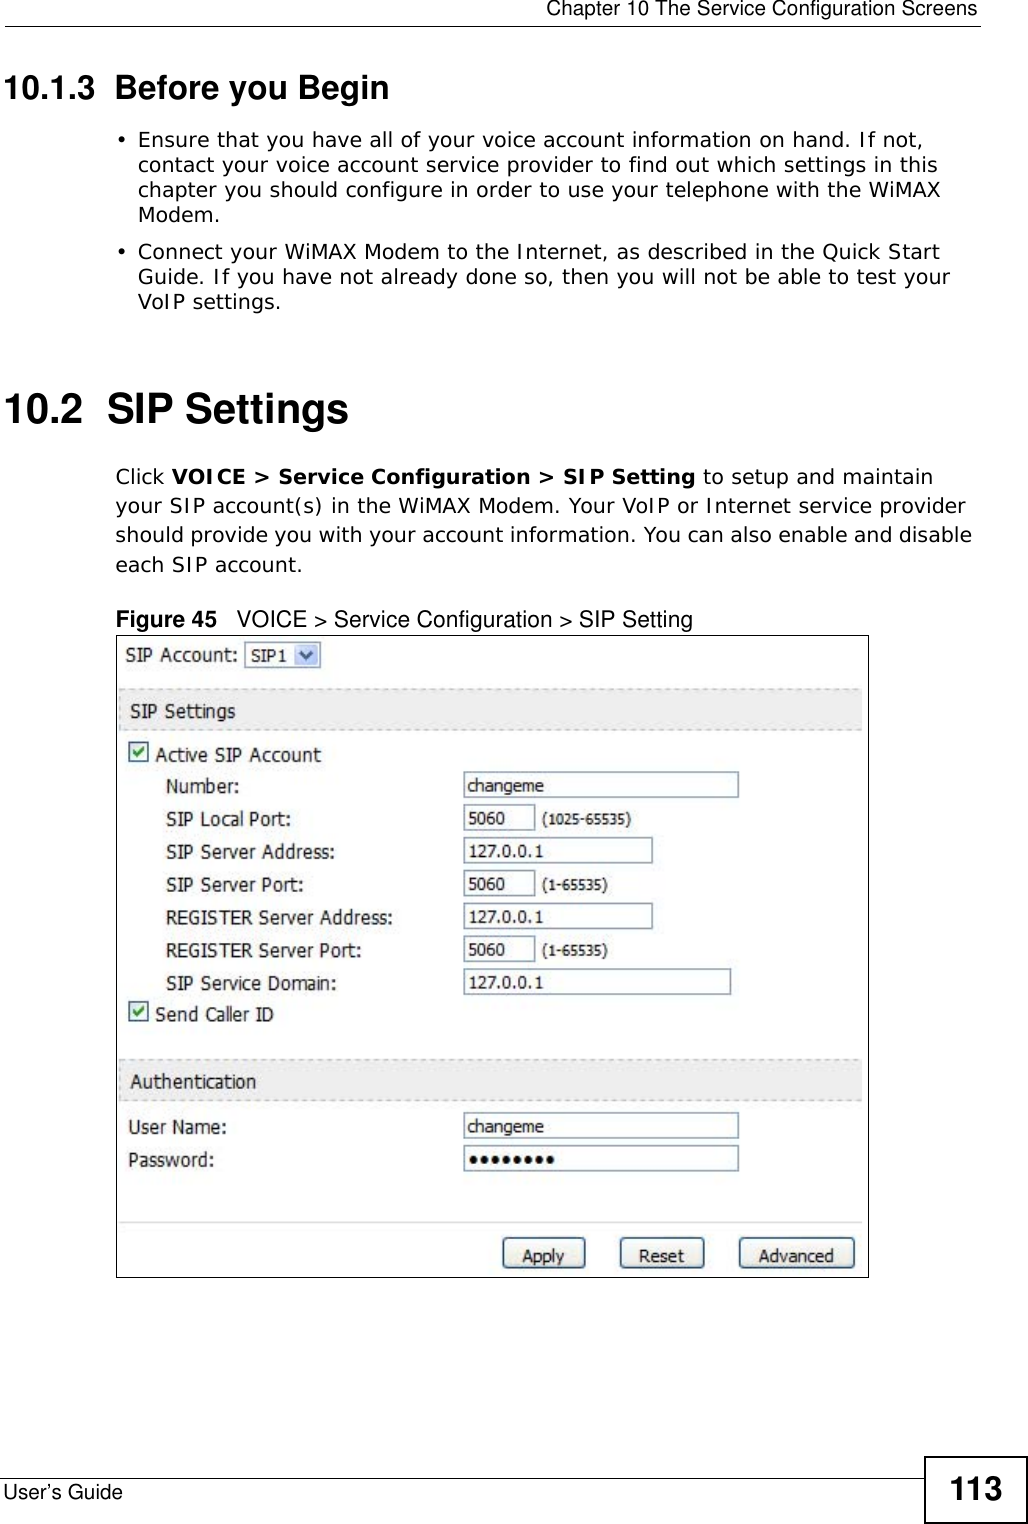  Chapter 10 The Service Configuration ScreensUser’s Guide 11310.1.3  Before you Begin• Ensure that you have all of your voice account information on hand. If not, contact your voice account service provider to find out which settings in this chapter you should configure in order to use your telephone with the WiMAX Modem.• Connect your WiMAX Modem to the Internet, as described in the Quick Start Guide. If you have not already done so, then you will not be able to test your VoIP settings.10.2  SIP SettingsClick VOICE &gt; Service Configuration &gt; SIP Setting to setup and maintain your SIP account(s) in the WiMAX Modem. Your VoIP or Internet service provider should provide you with your account information. You can also enable and disable each SIP account.Figure 45   VOICE &gt; Service Configuration &gt; SIP Setting